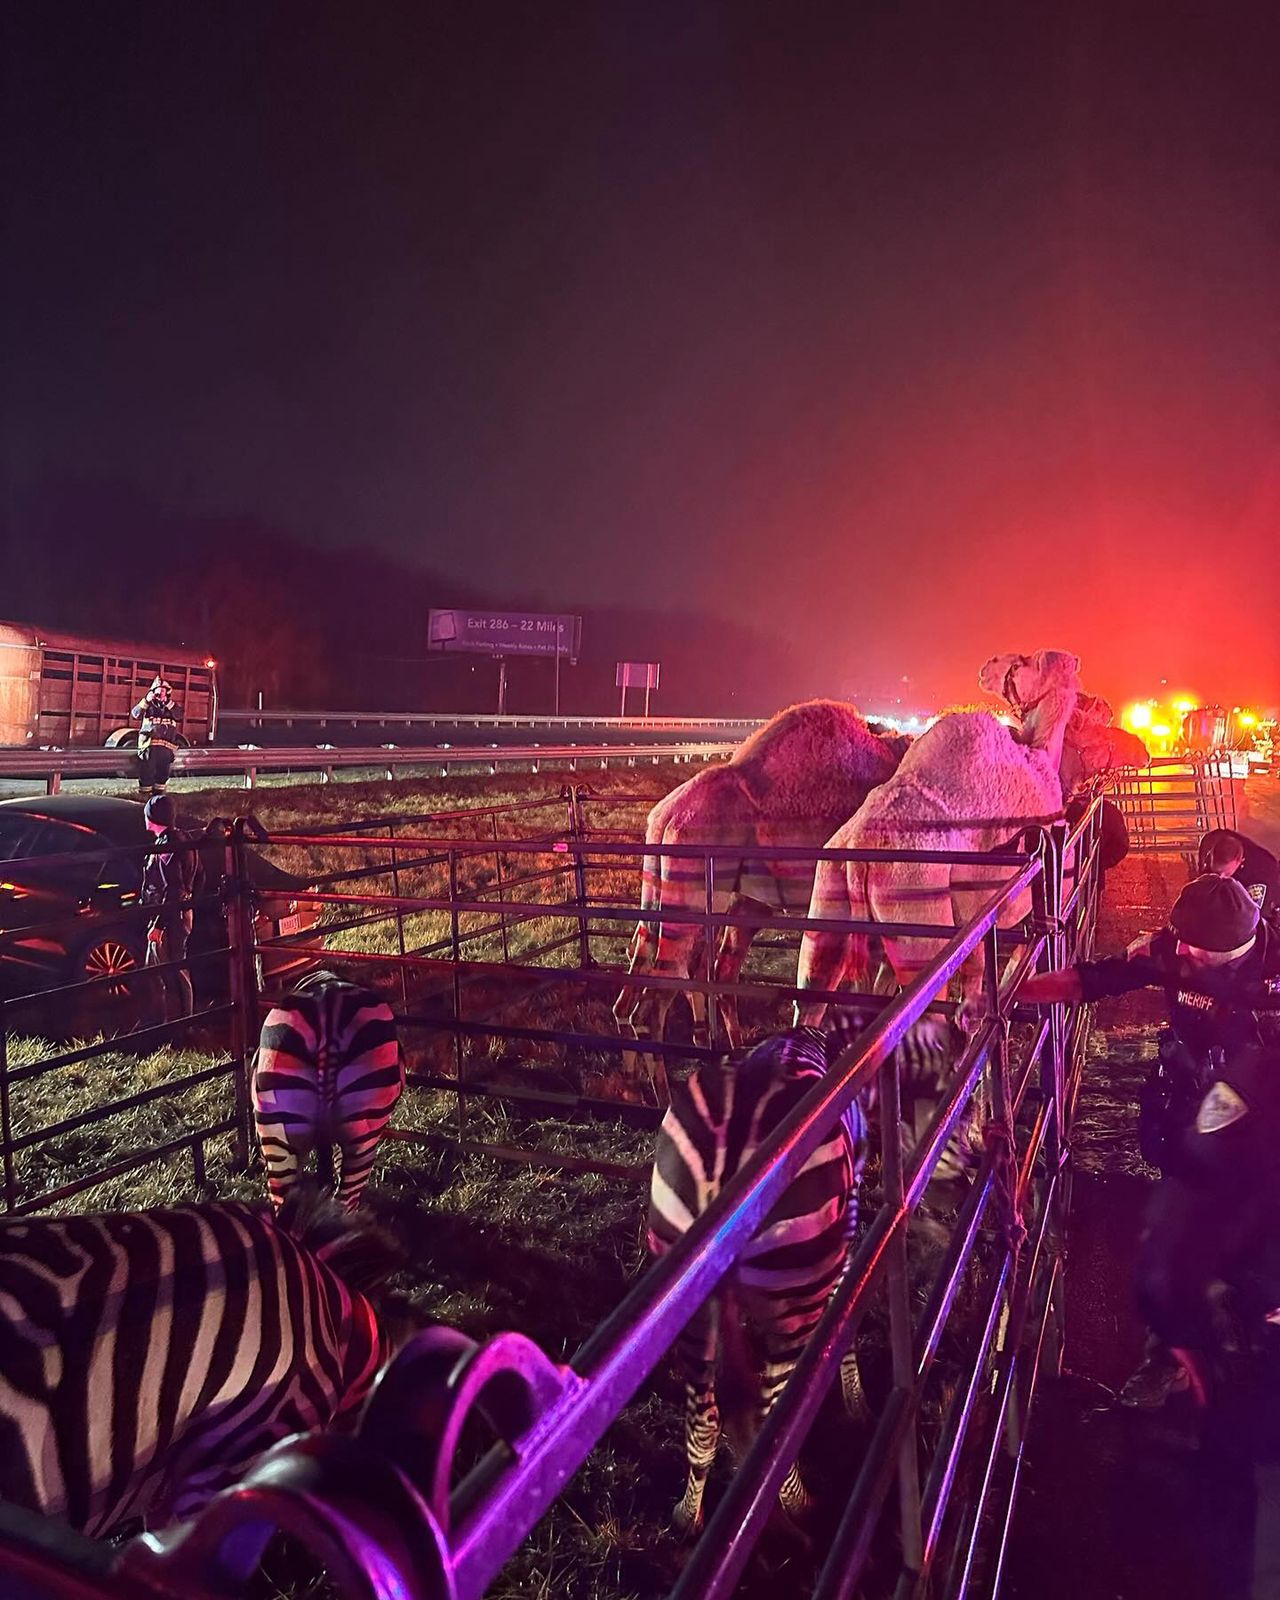 Circus animals rescued from burning truck